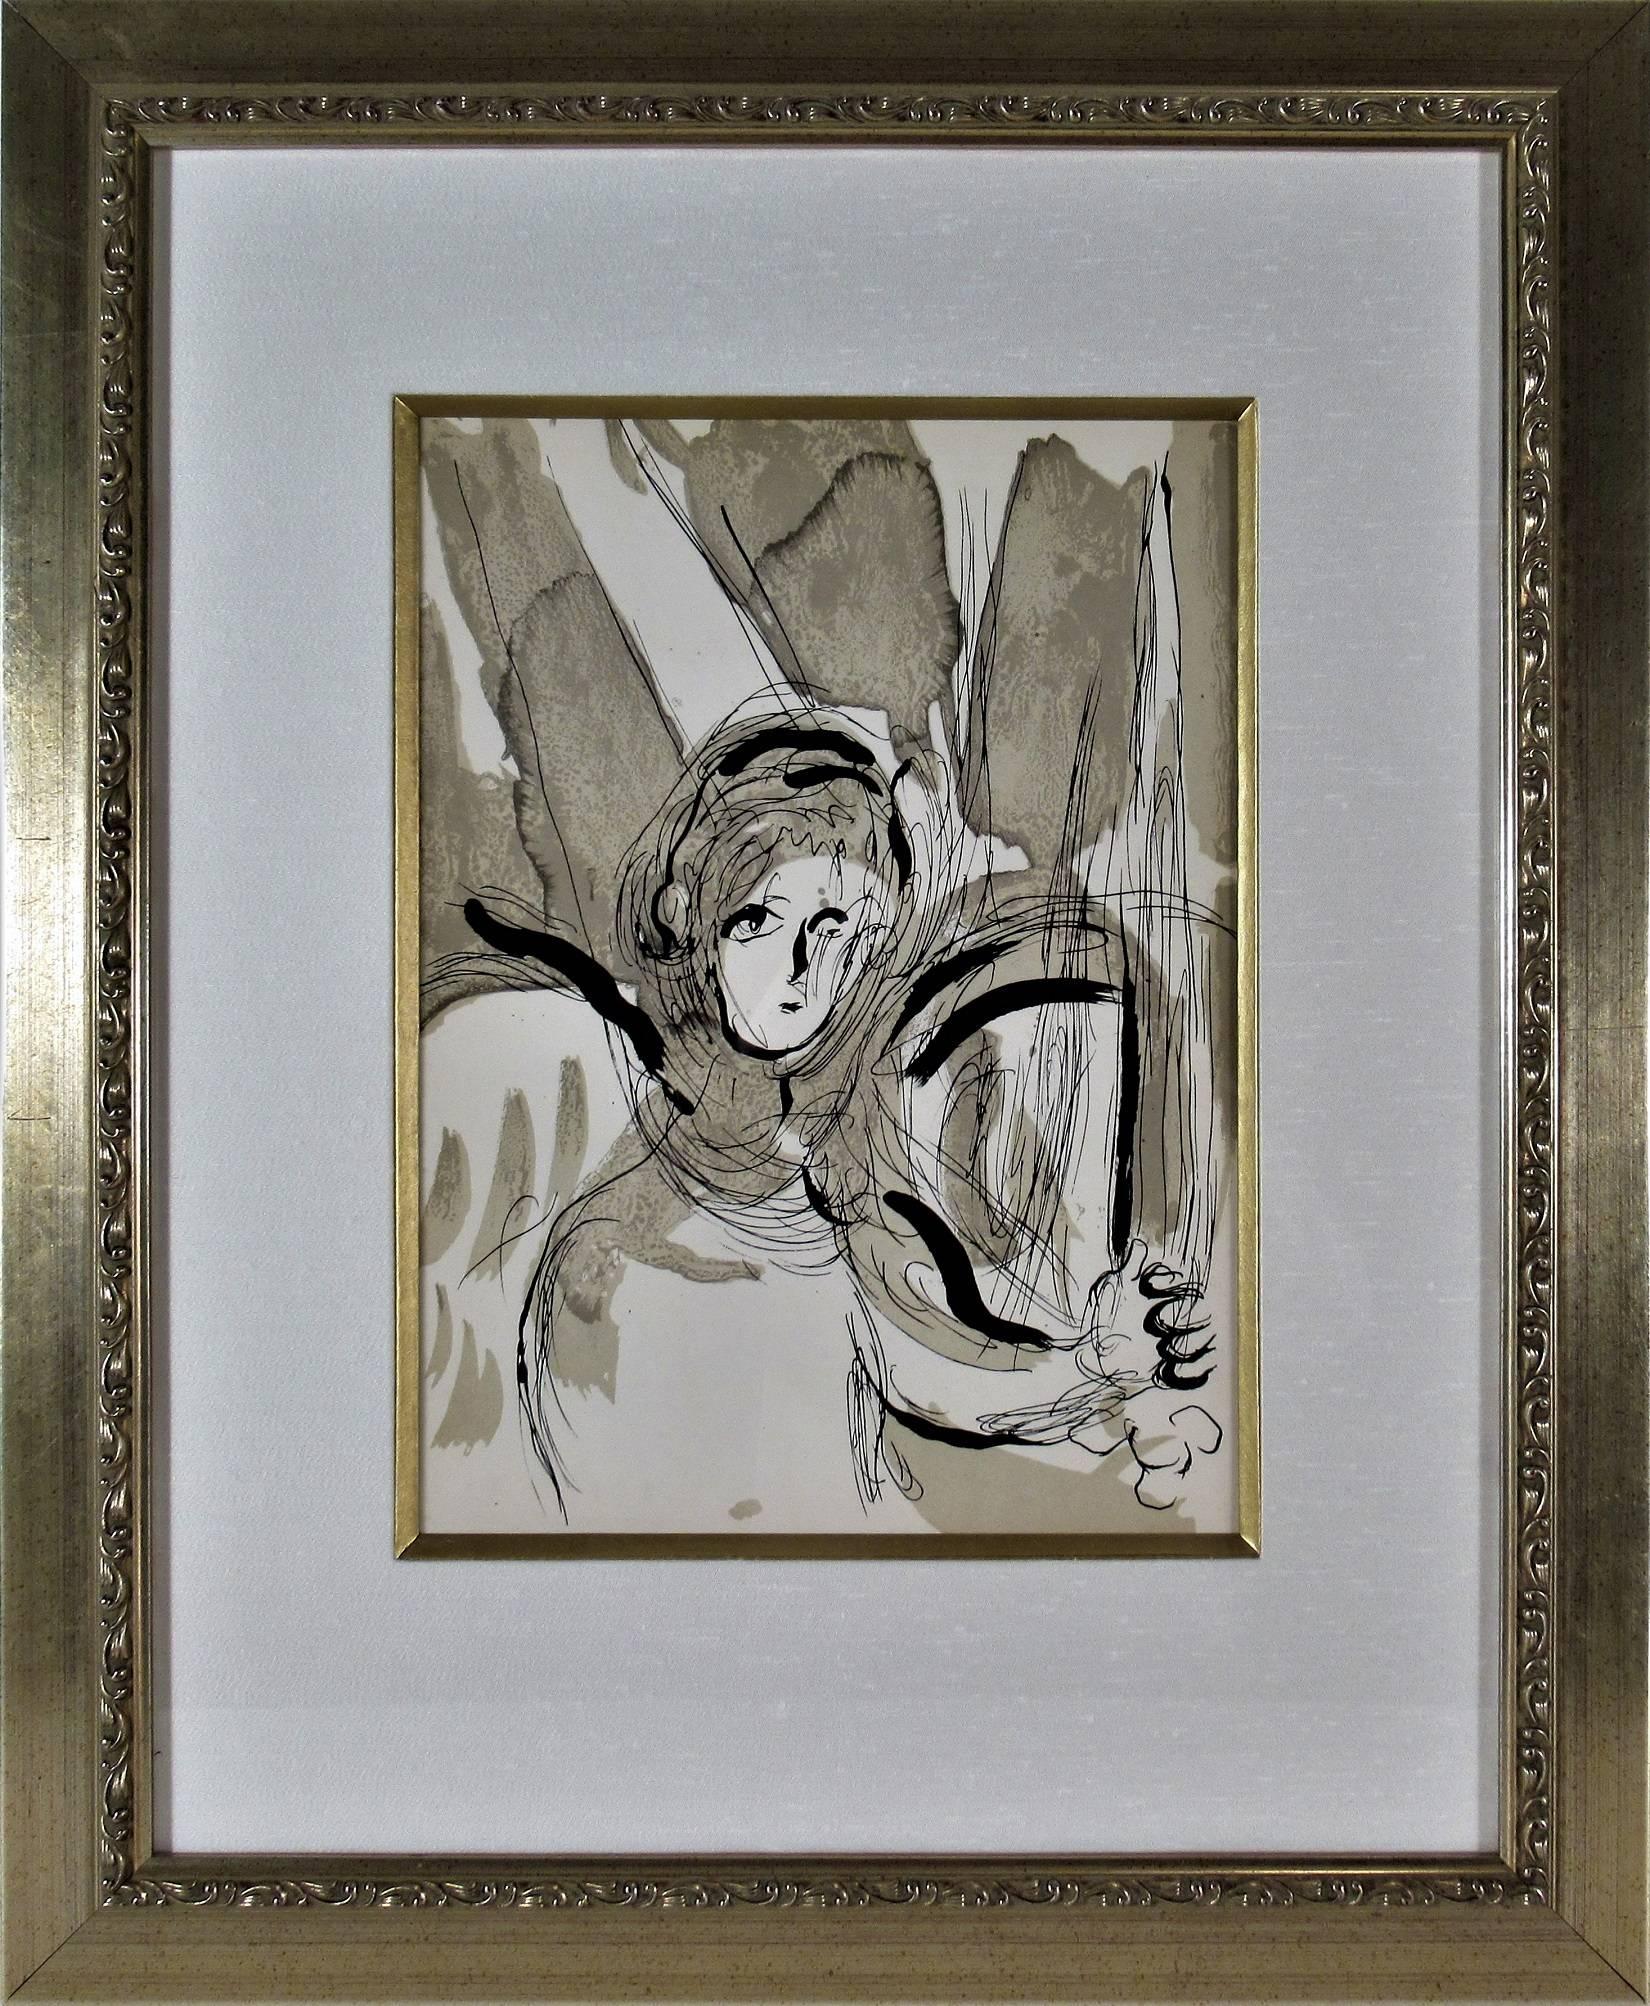 Marc Chagall Figurative Print - "Angel With Sword" from "The Bible" original color lithograph.